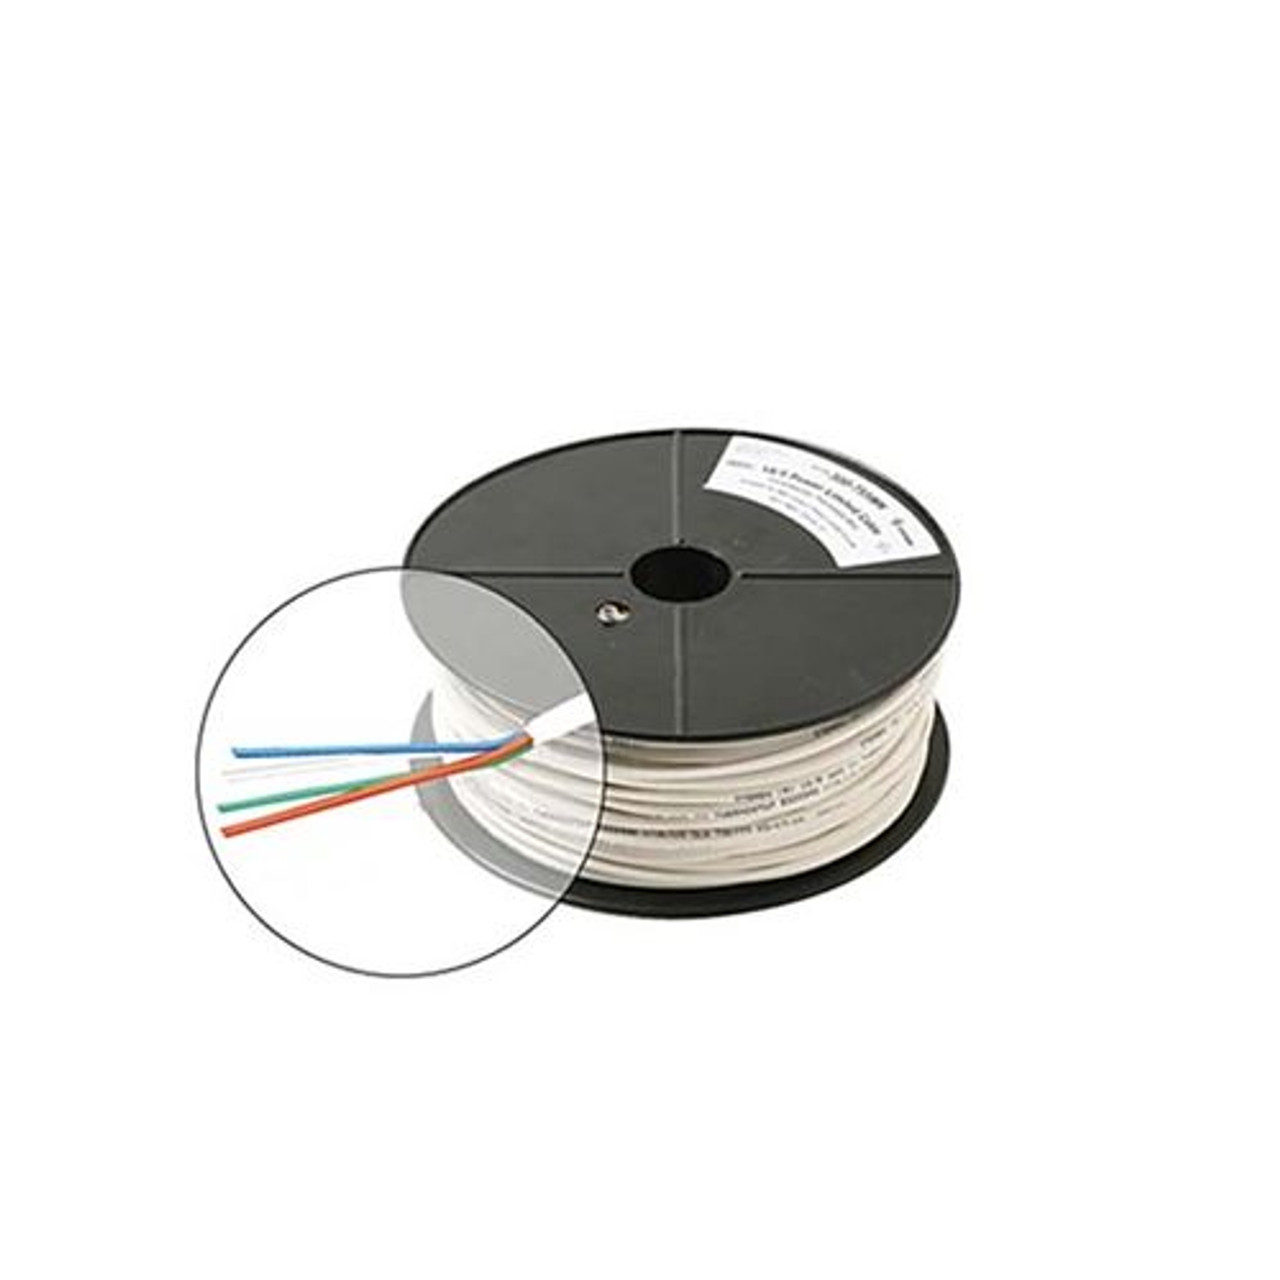 Eagle 500' FT 18 AWG GA 4 Conductor Cable White Solid Copper Control Thermostat UL 18-4 Reel White Solid Copper Wire Color Coded Contol UL PVC UL Color Coded